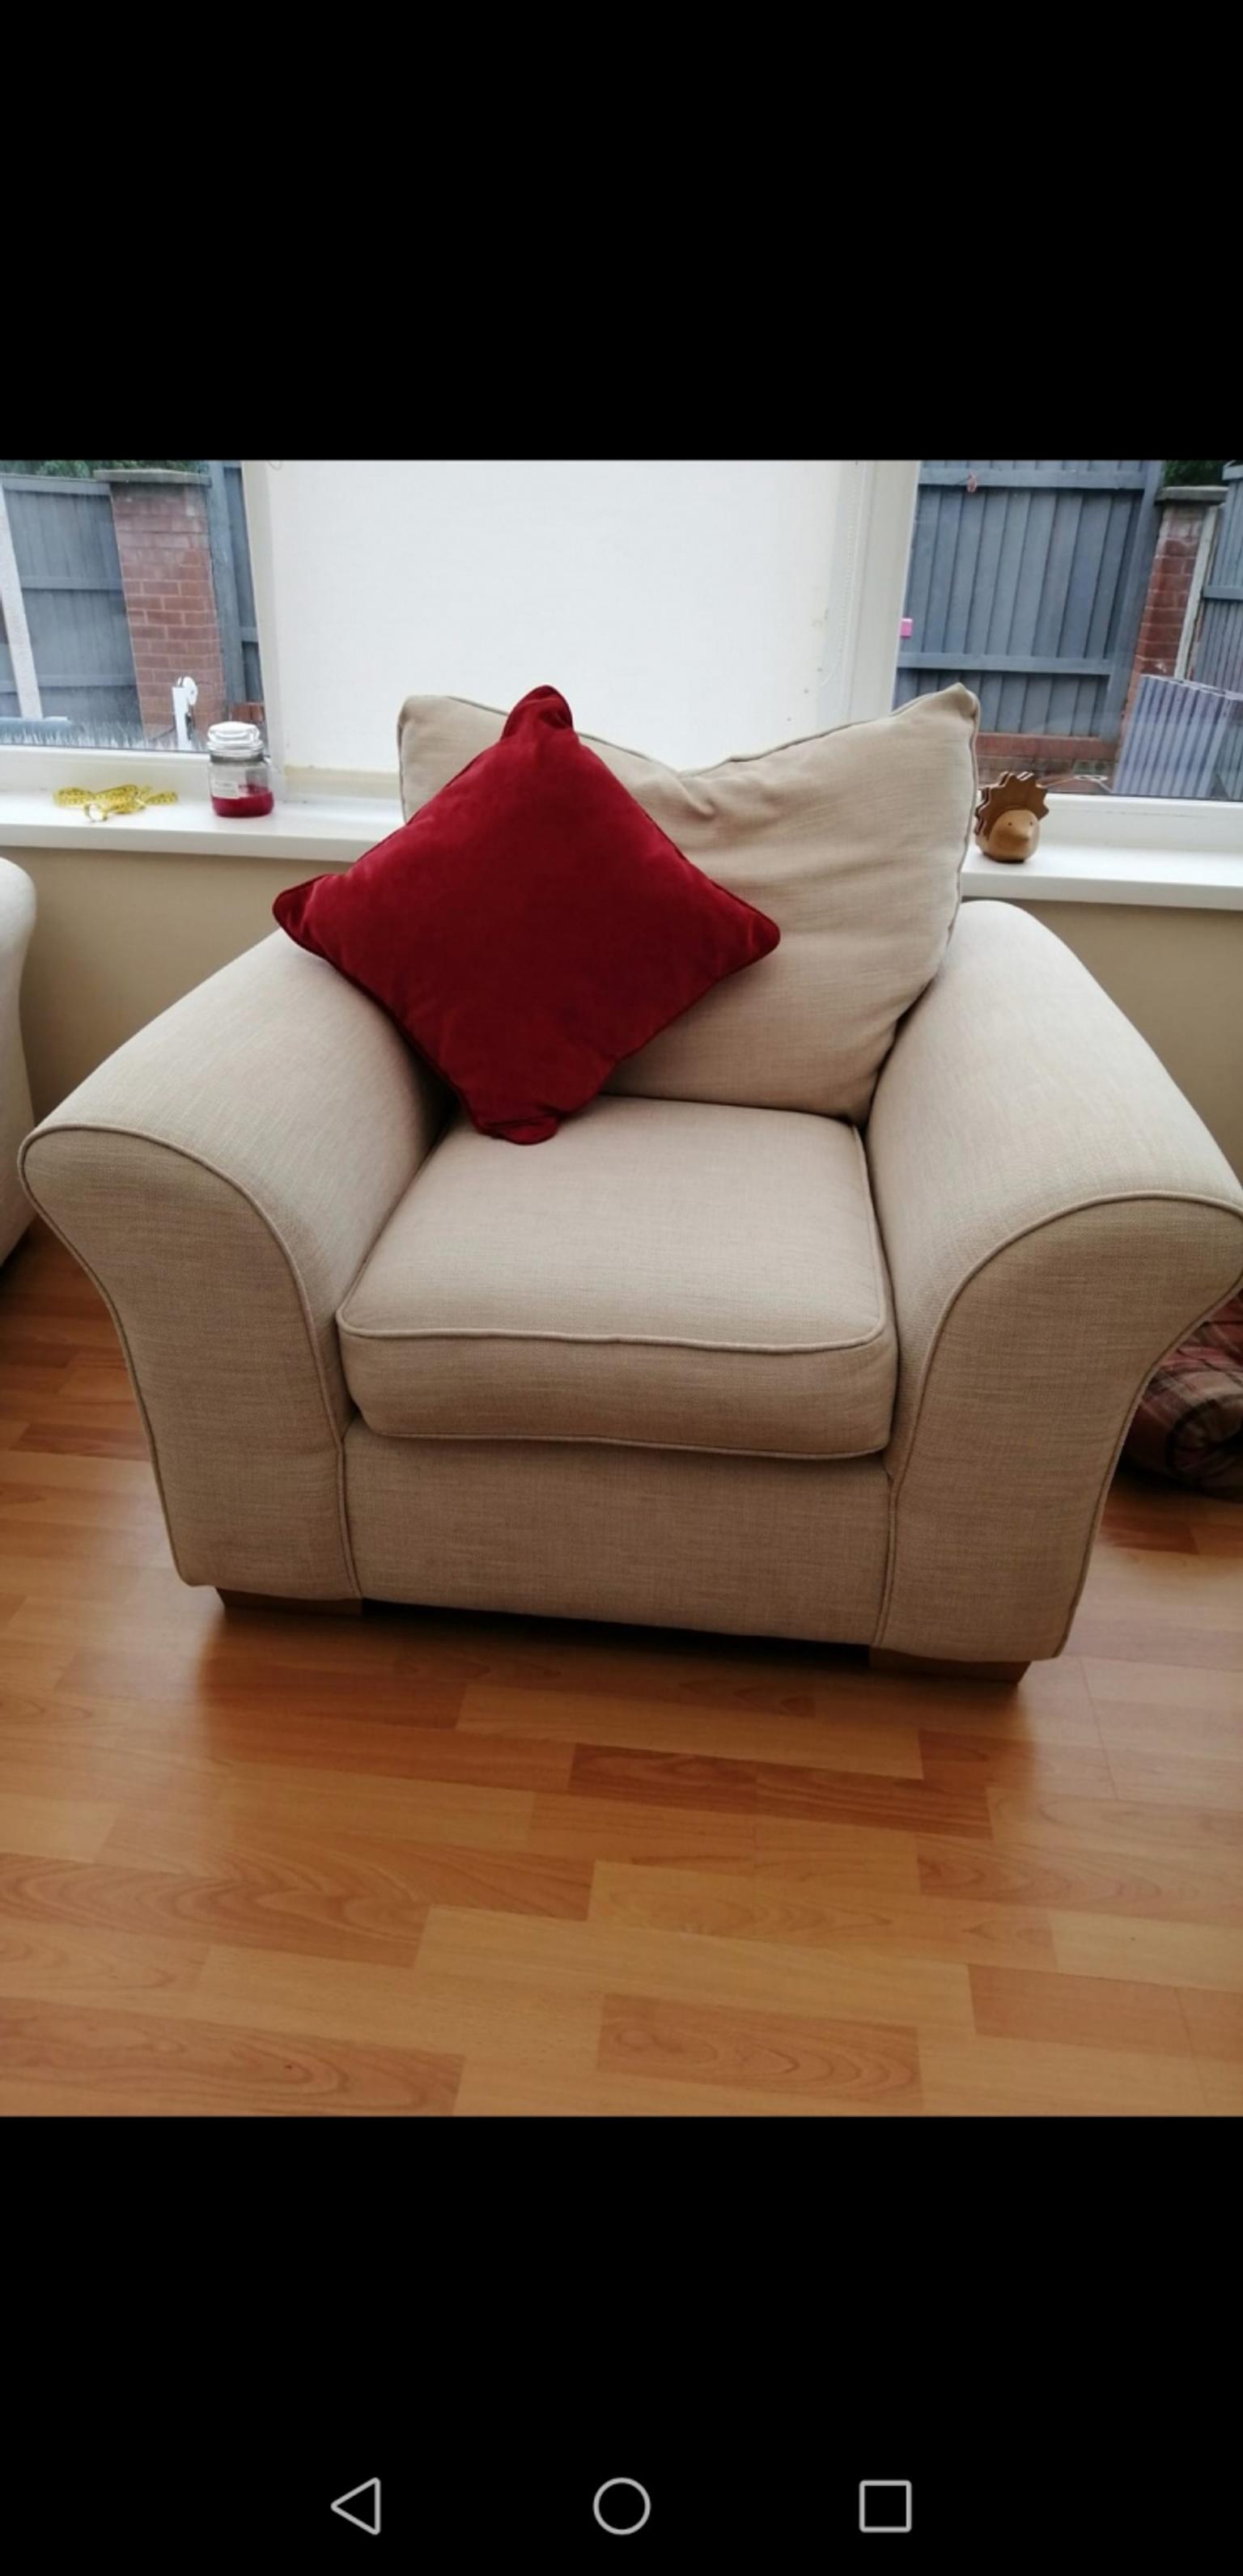 Two Chairs For Sale From Next In L25 Liverpool For 45 00 For Sale